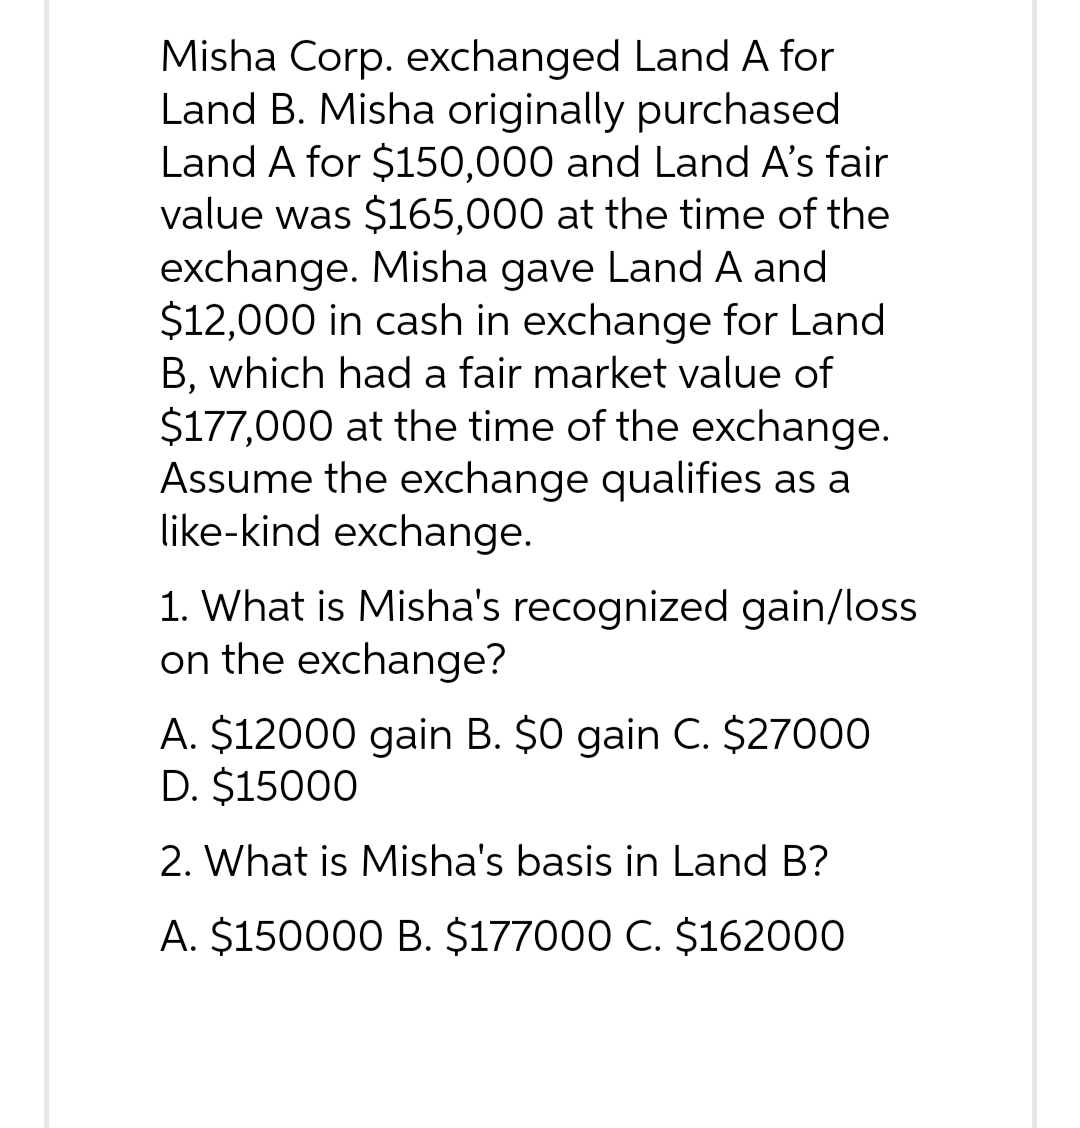 Misha Corp. exchanged Land A for
Land B. Misha originally purchased
Land A for $150,000 and Land A's fair
value was $165,000 at the time of the
exchange. Misha gave Land A and
$12,000 in cash in exchange for Land
B, which had a fair market value of
$177,000 at the time of the exchange.
Assume the exchange qualifies as a
like-kind exchange.
1. What is Misha's recognized gain/loss
on the exchange?
A. $12000 gain B. $0 gain C. $27000
D. $15000
2. What is Misha's basis in Land B?
A. $150000 B. $177000 C. $162000